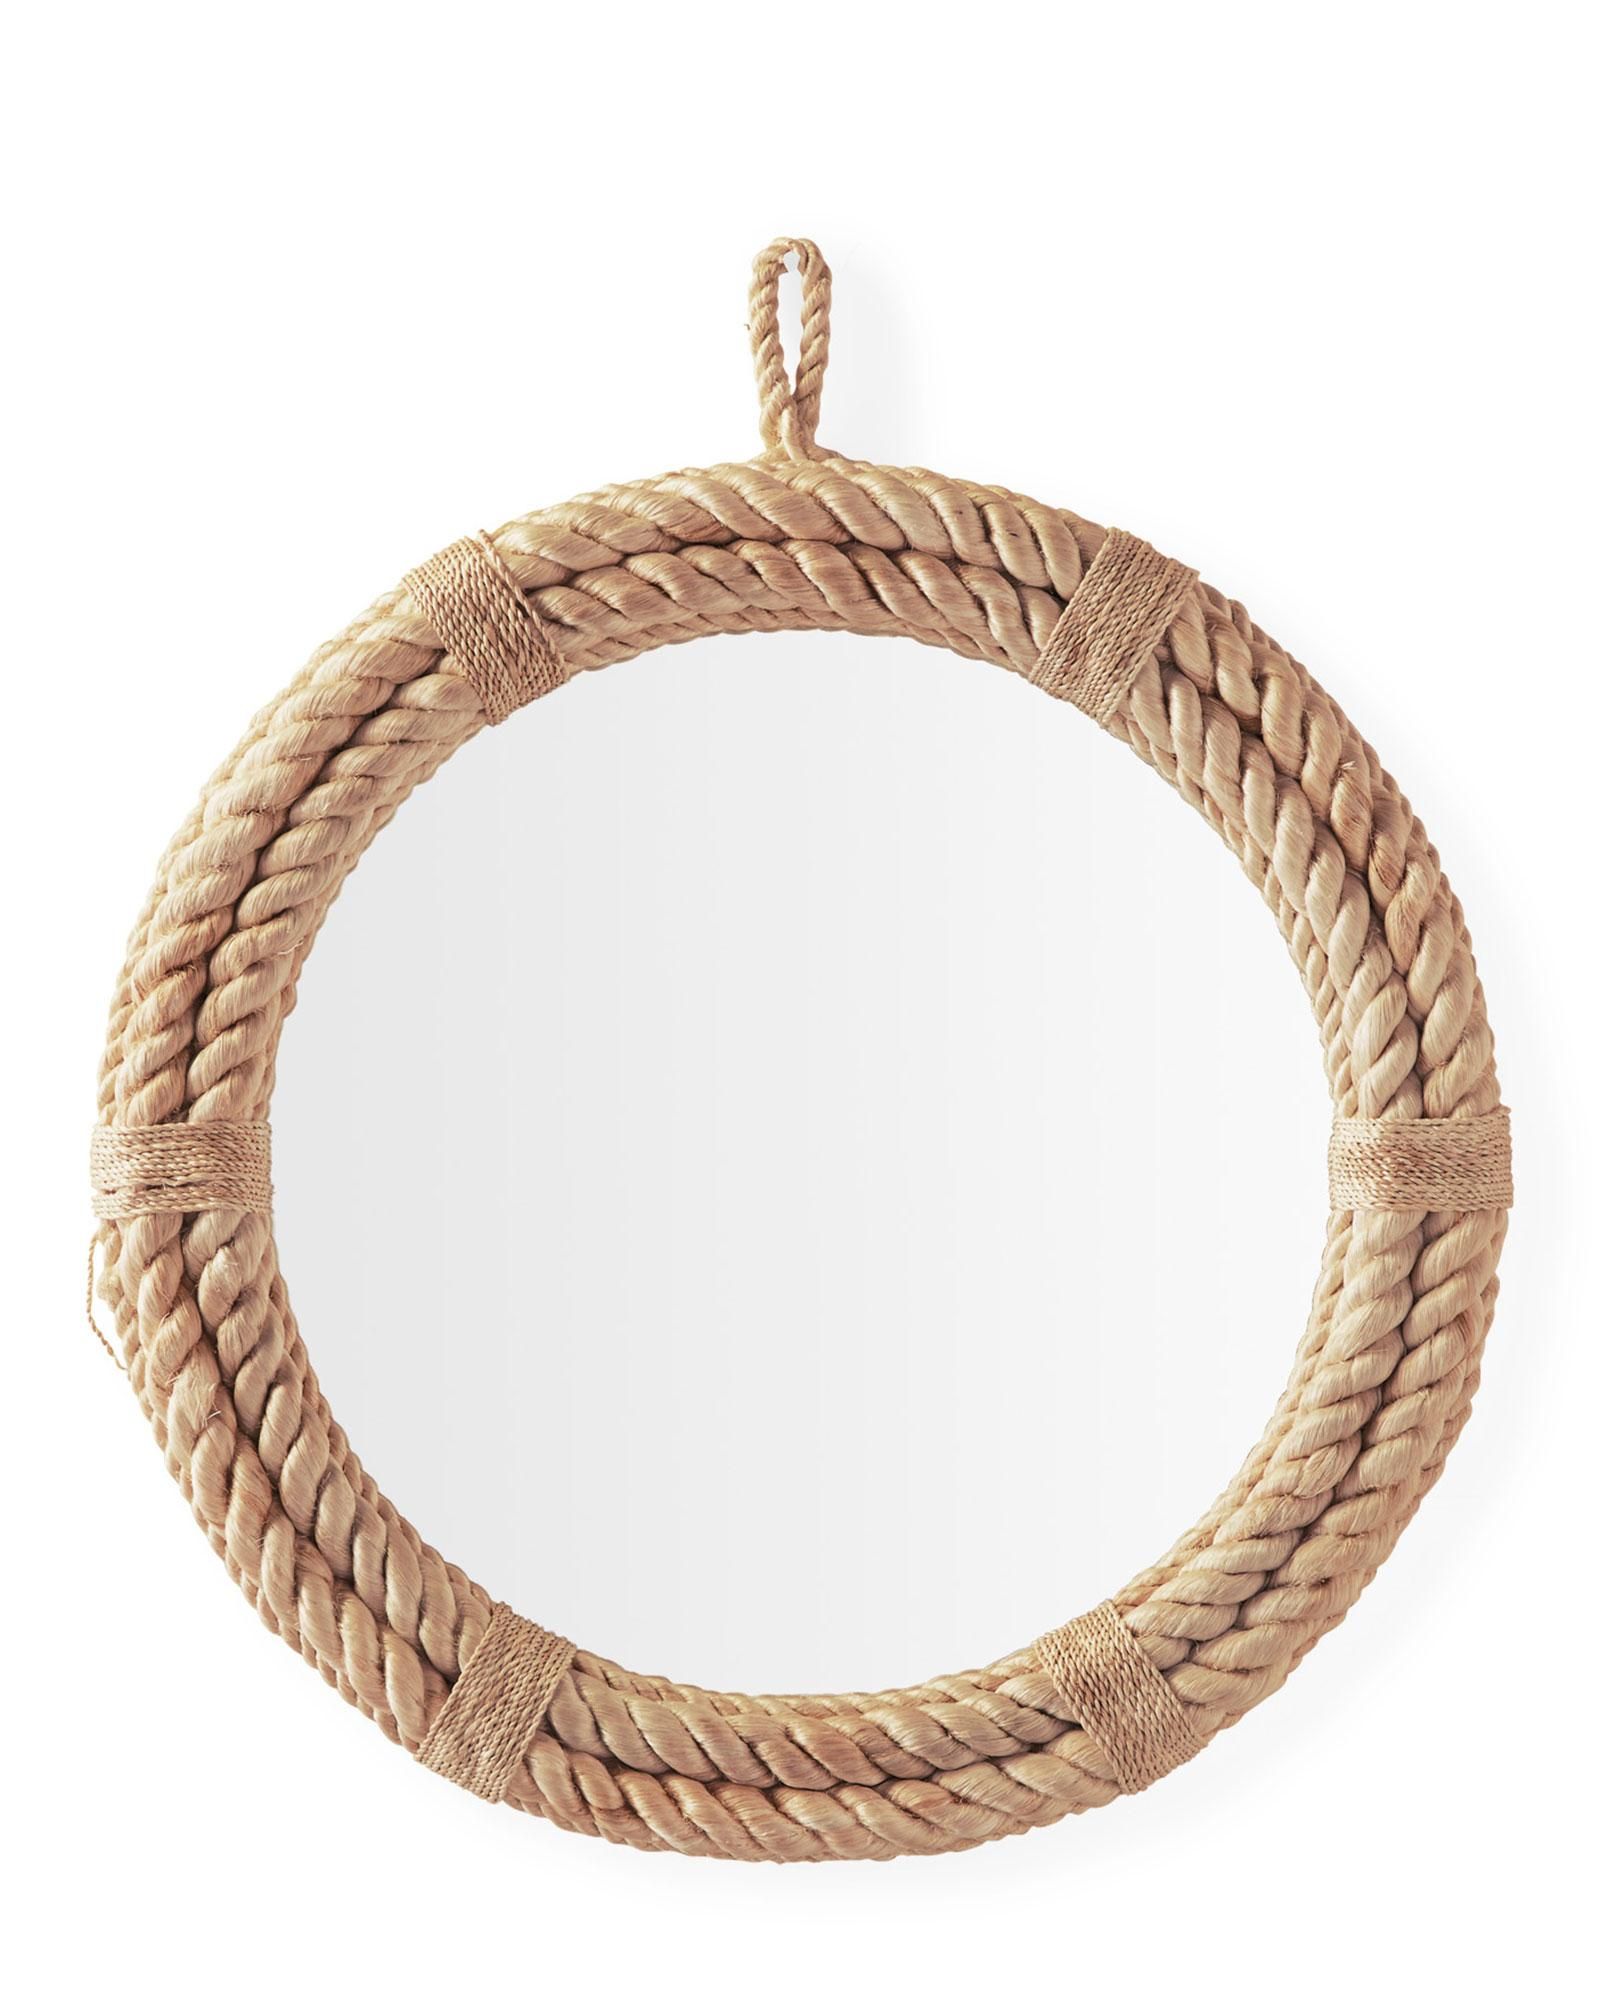 Nautical Rope Mirror | Serena and Lily